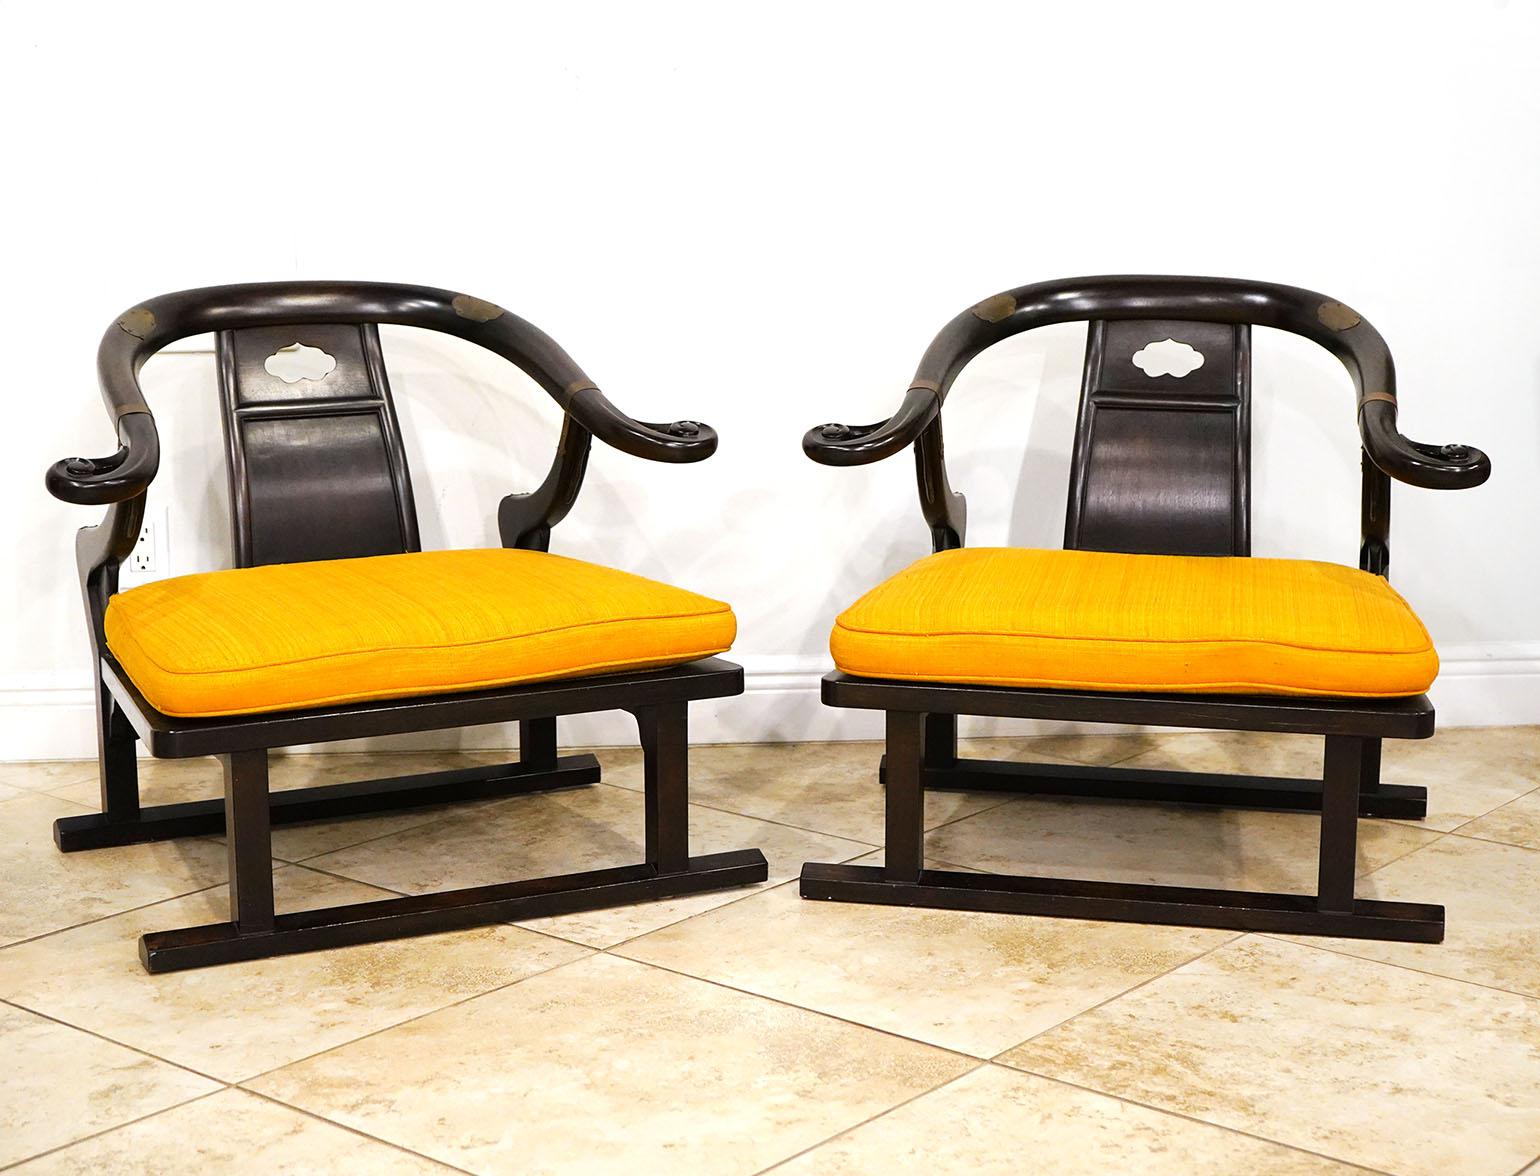 Pair of Chinese Style lounge chairs by Baker Furniture and designed by Michael Taylor. Dark Brown wood with brass accents. Labeled on bottom. Horseshoe design.